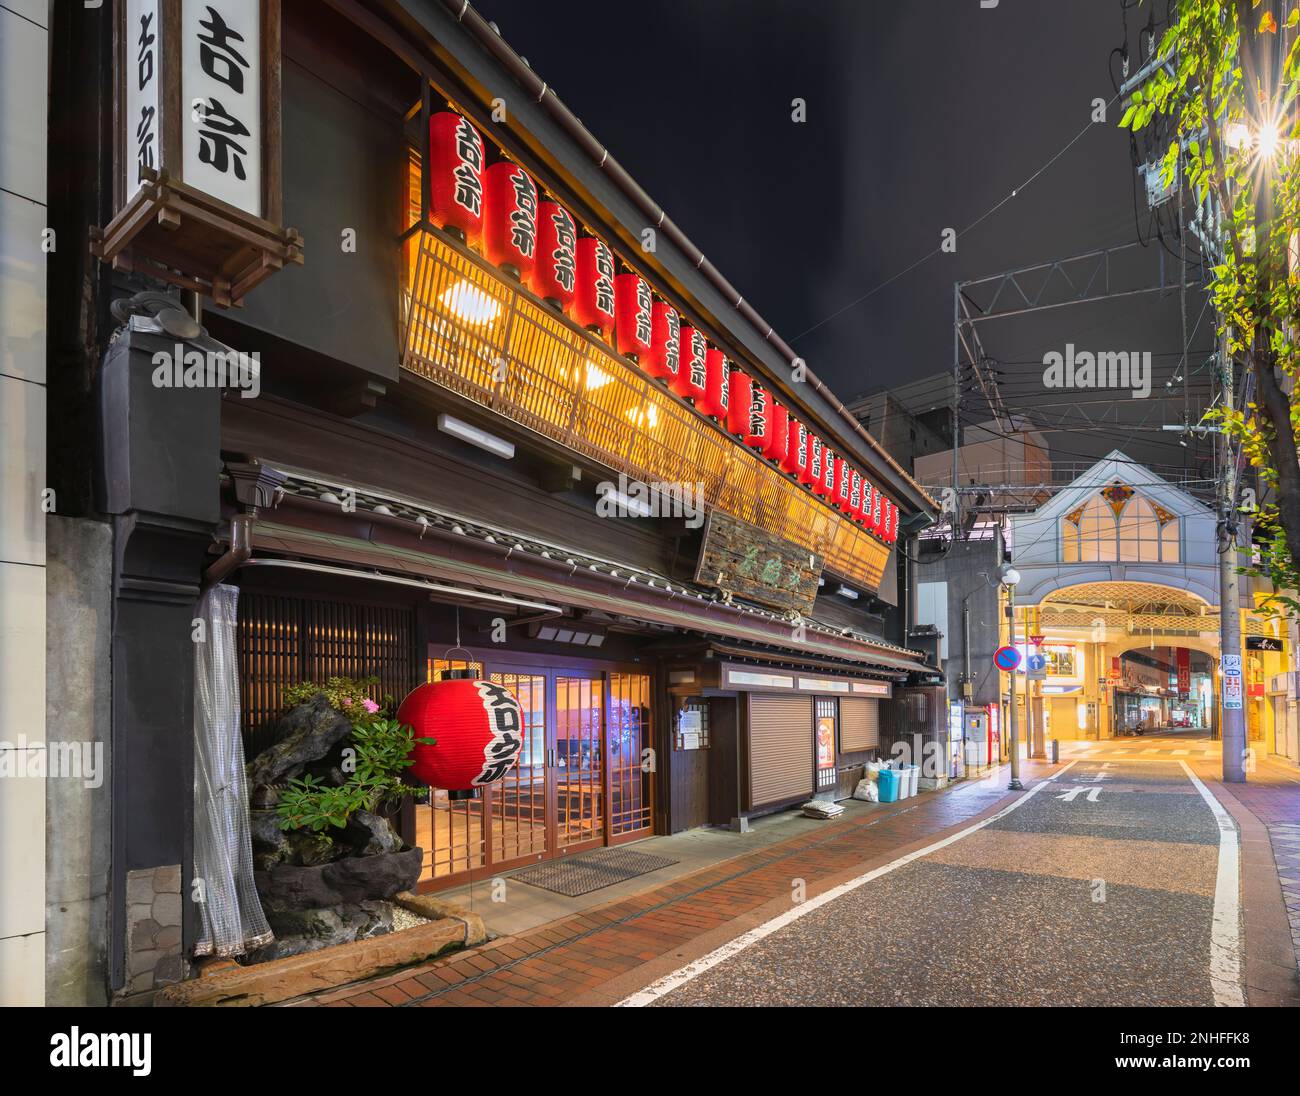 nagasaki, kyushu - dec 11 2022: Traditional wooden architecture of the Japanese restaurant Yossou specialized in egg custard Chawanmushi cuisine and a Stock Photo